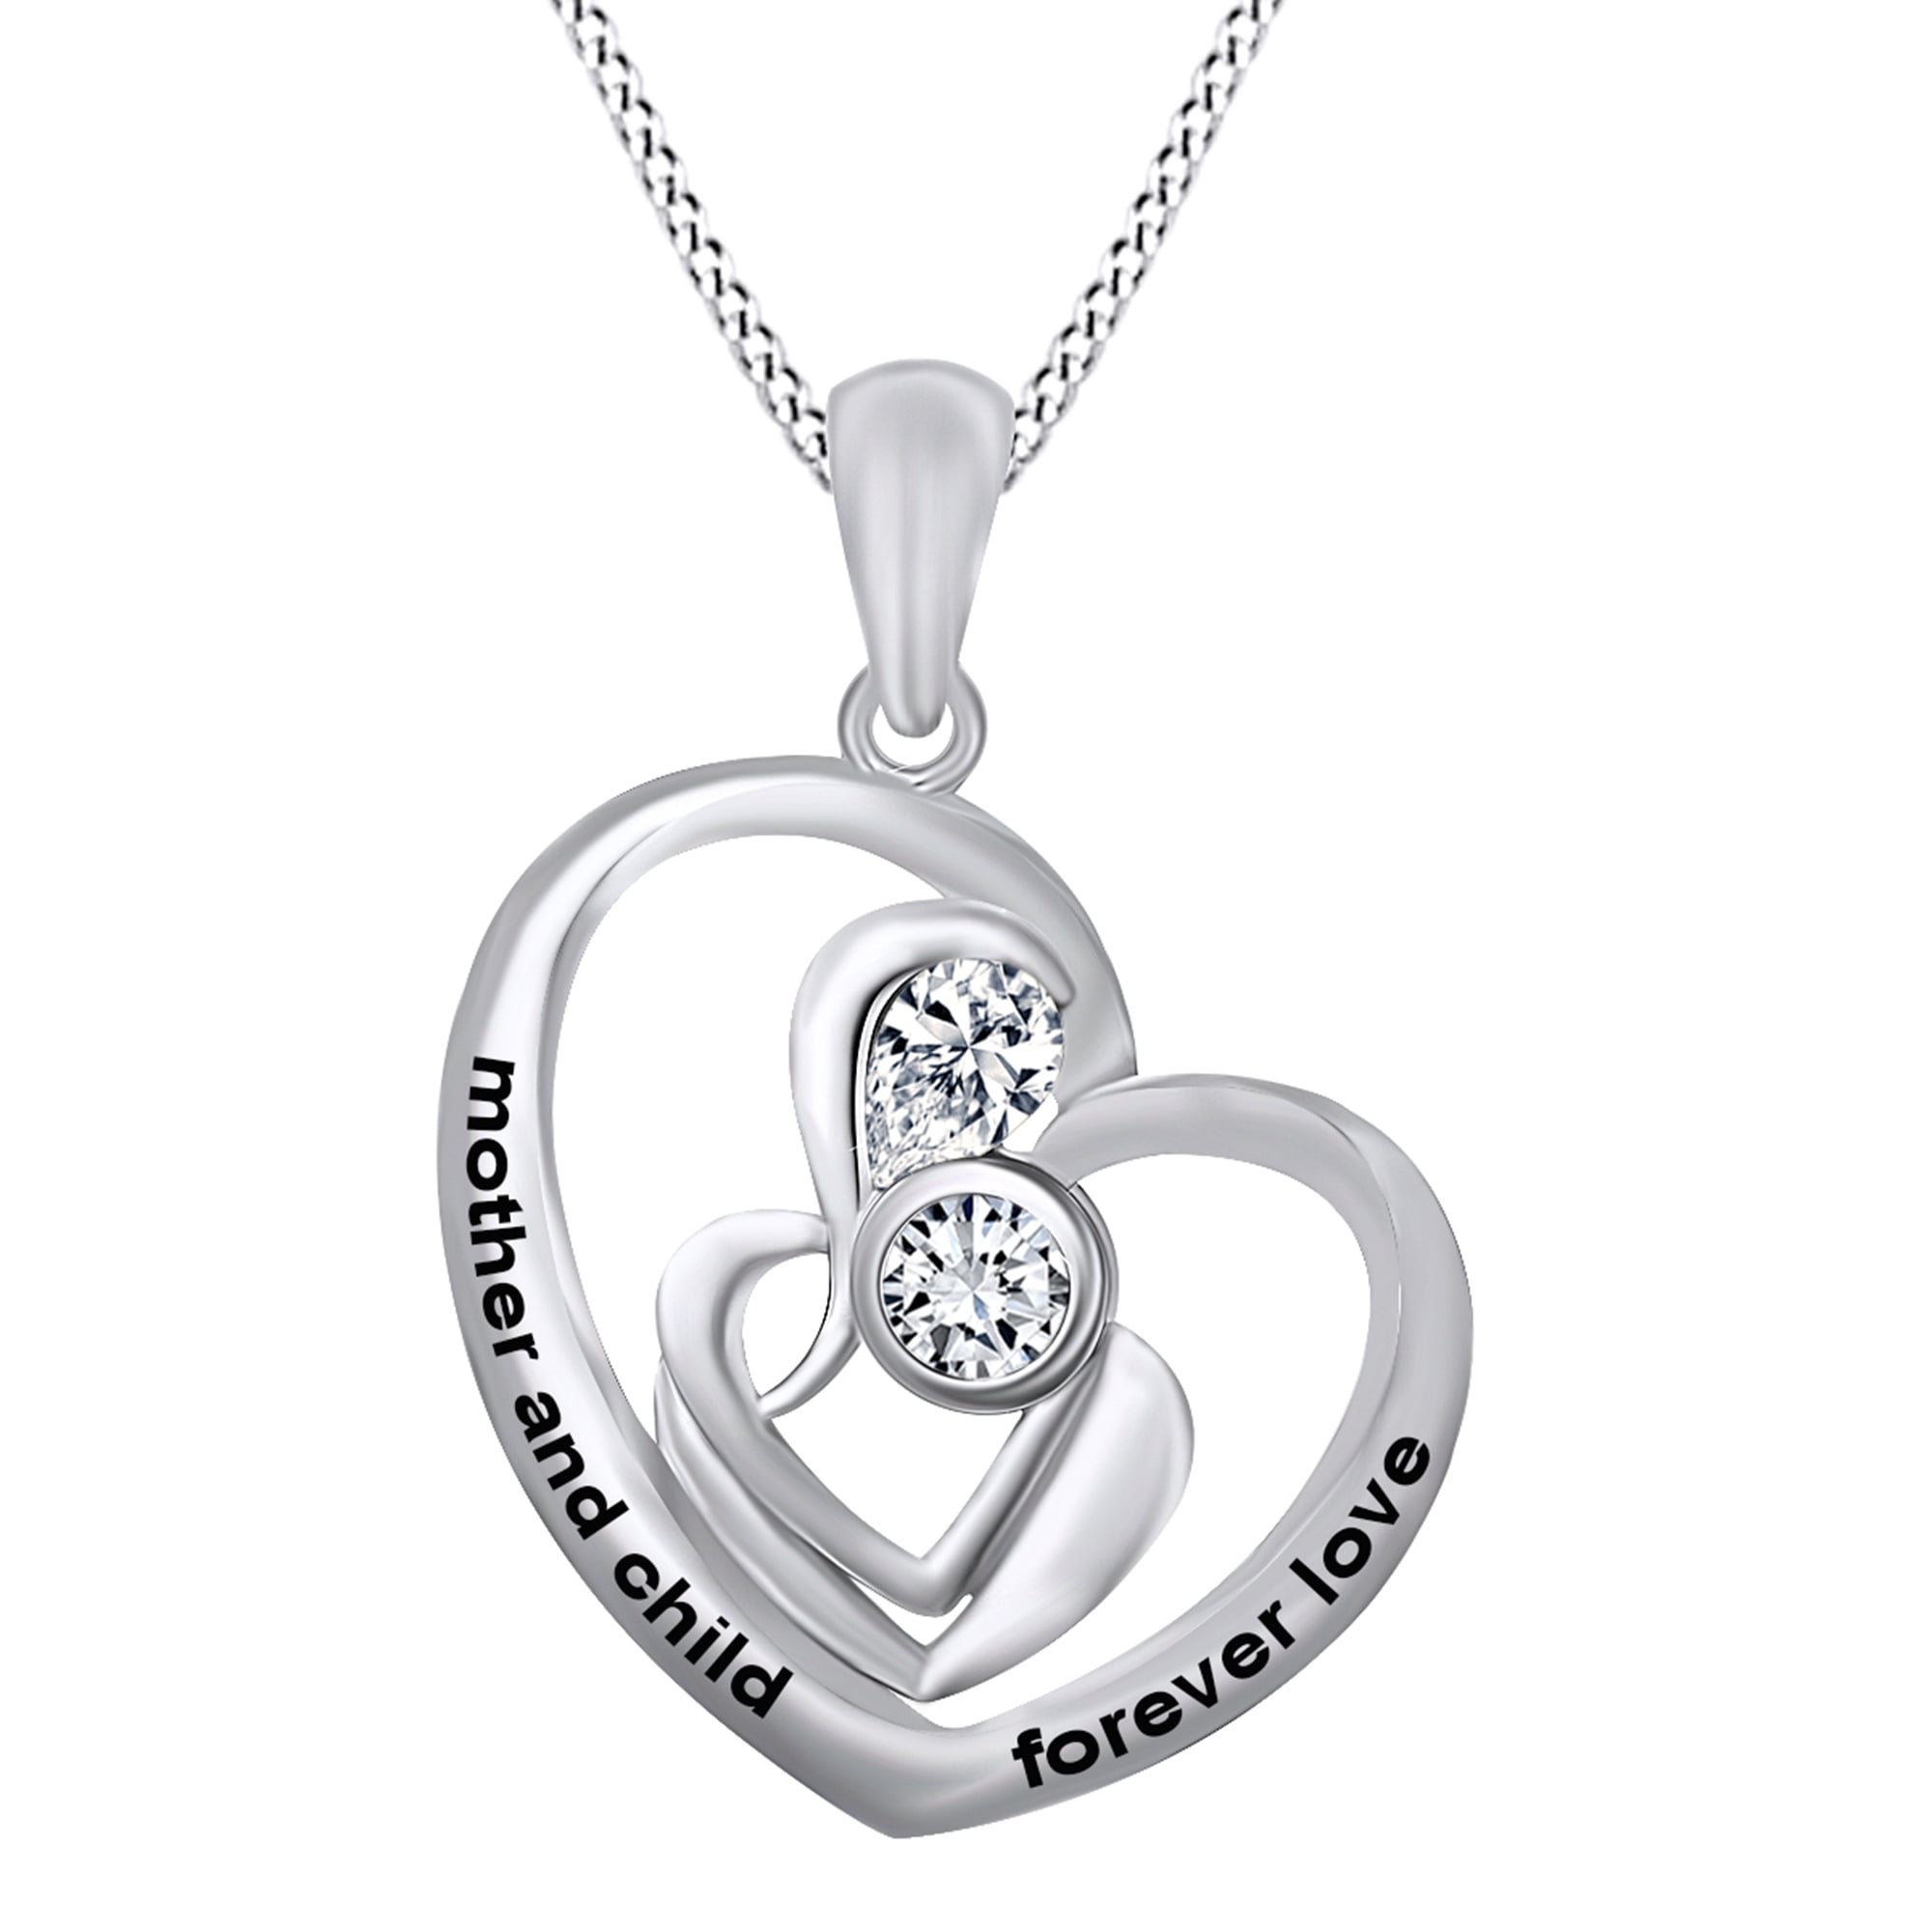 Jewel Zone US - Mother's Day Jewelry Gifts Personalized Engrave White ...